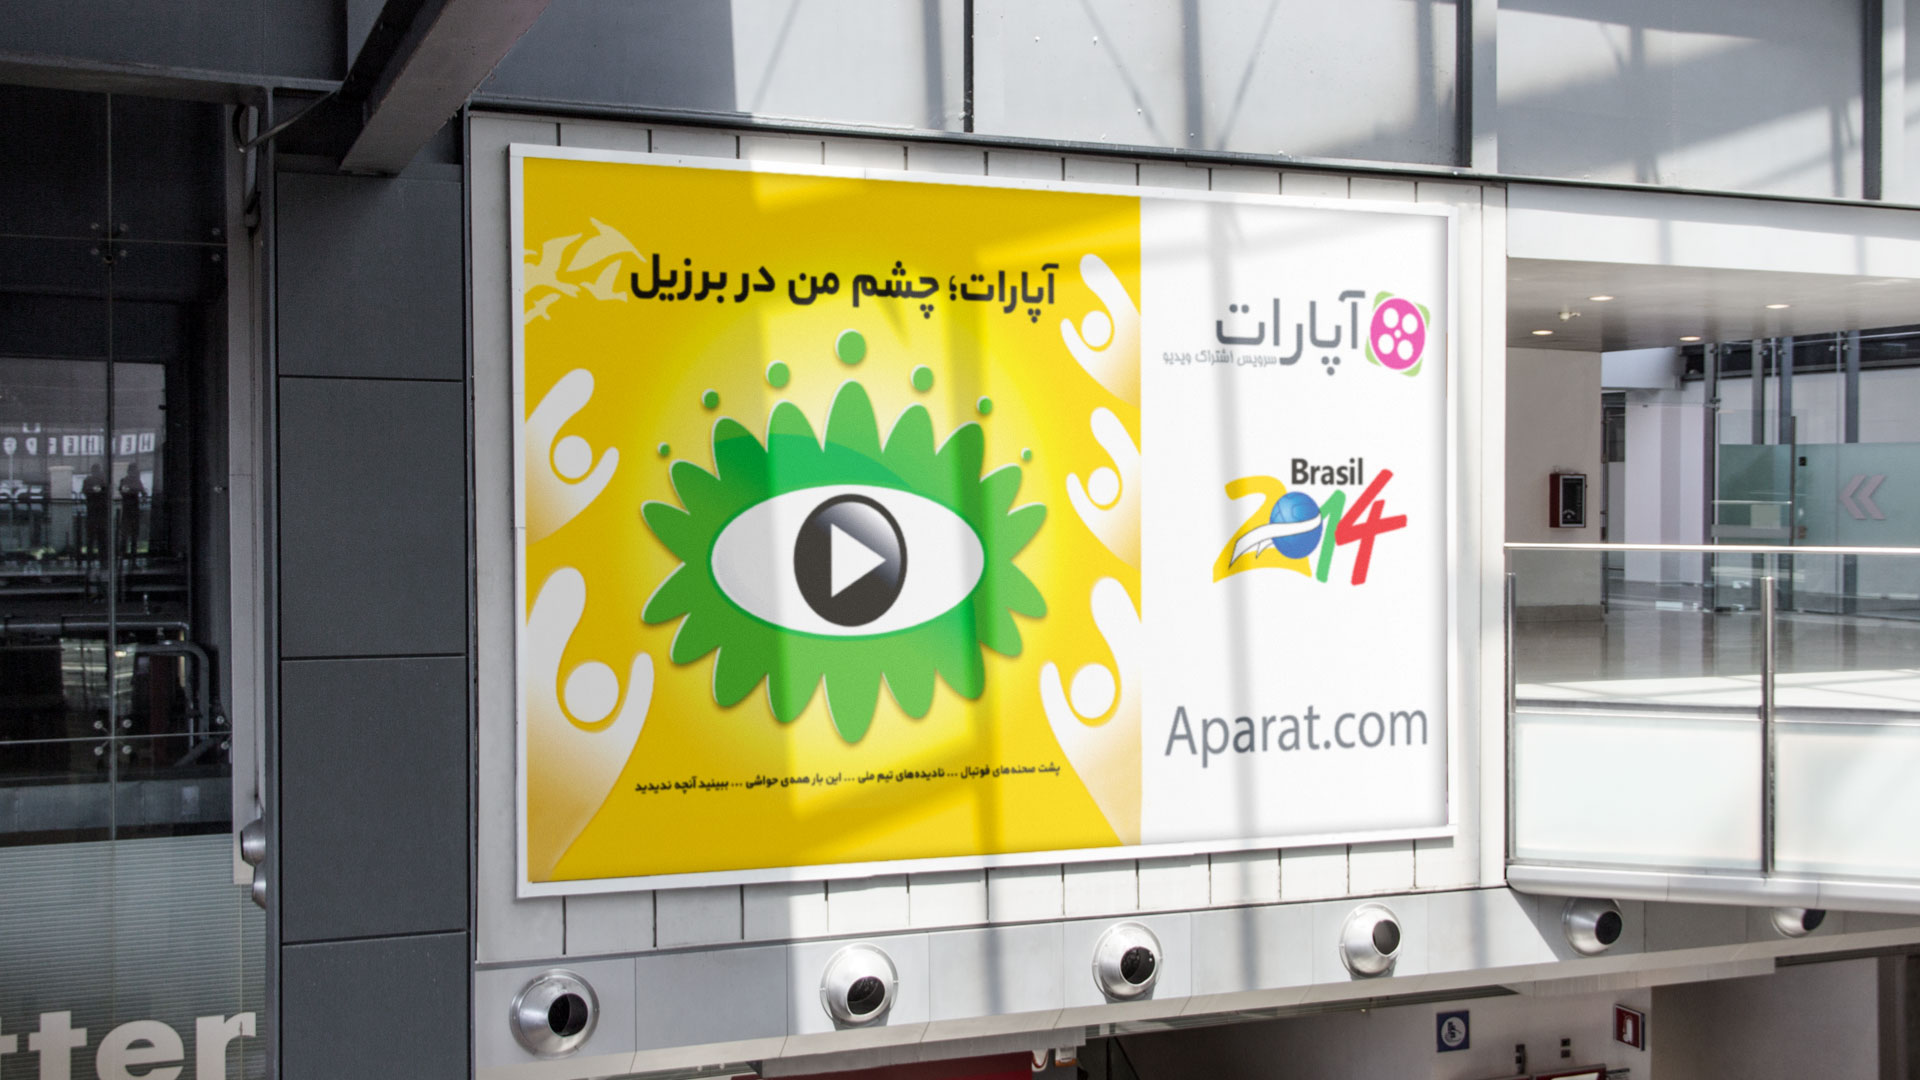 Initiating an Out-of-home Advertising Campaign in Iran